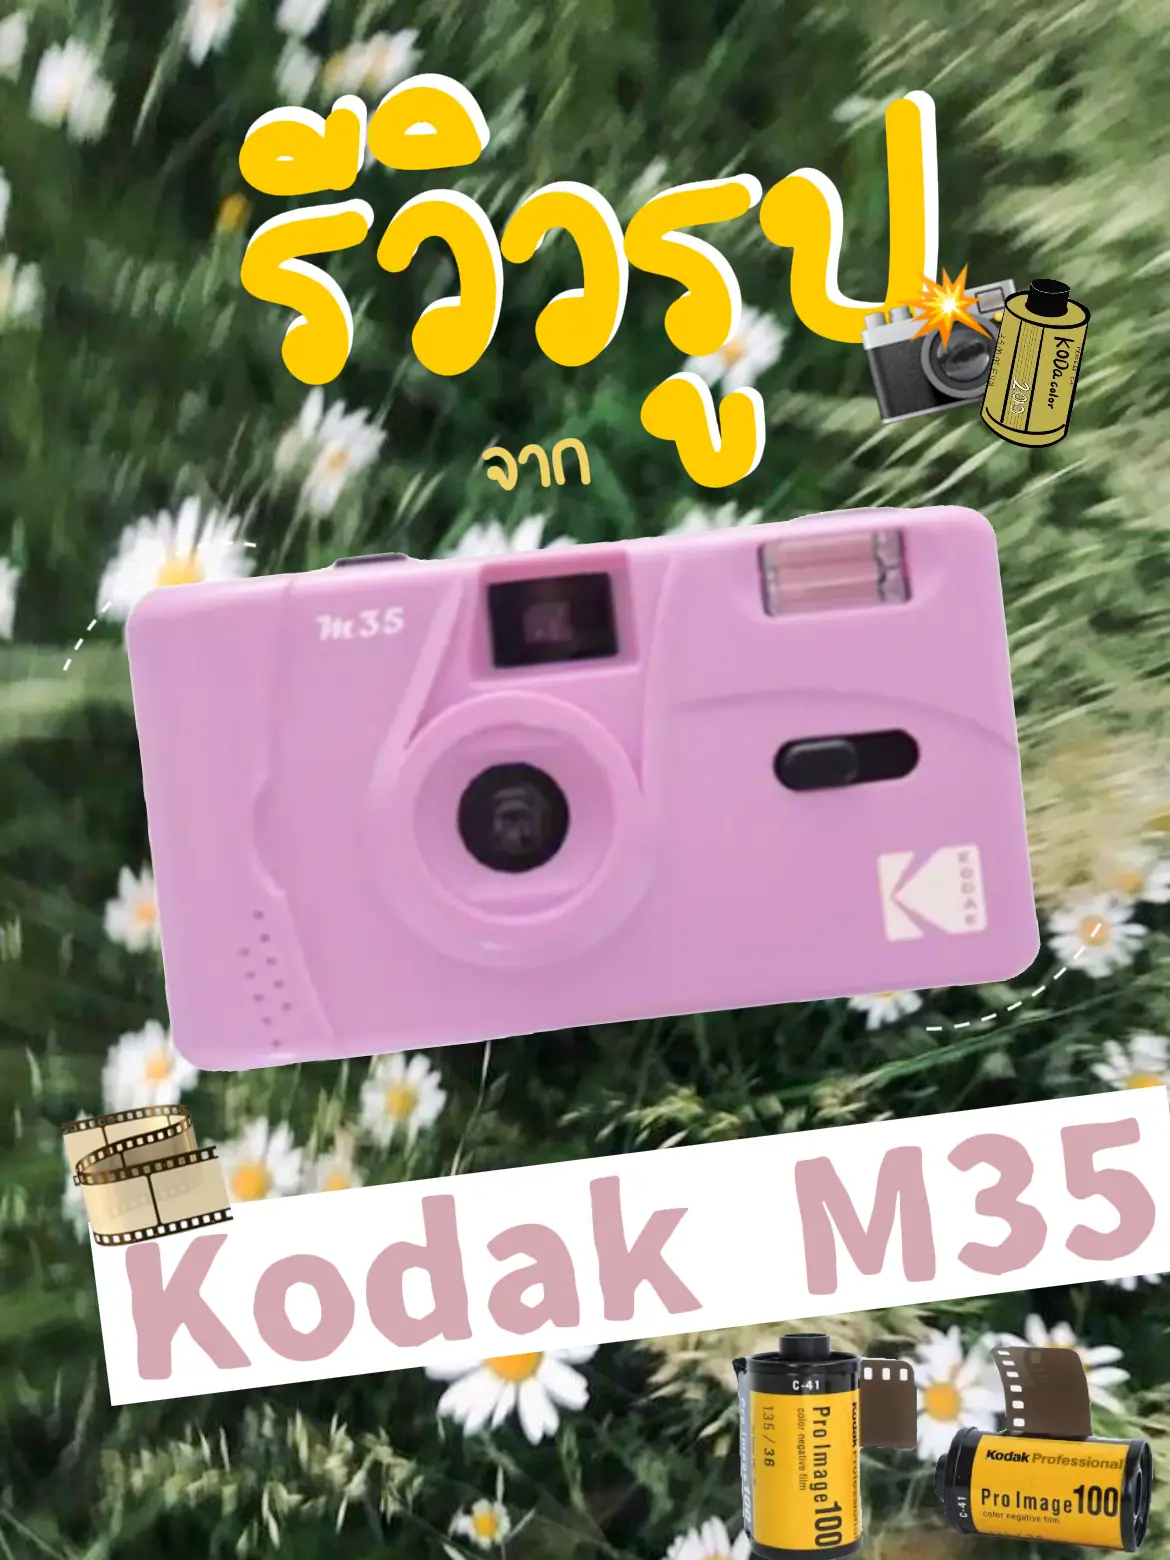 Review of photos obtained from the Kodak M35 film camera